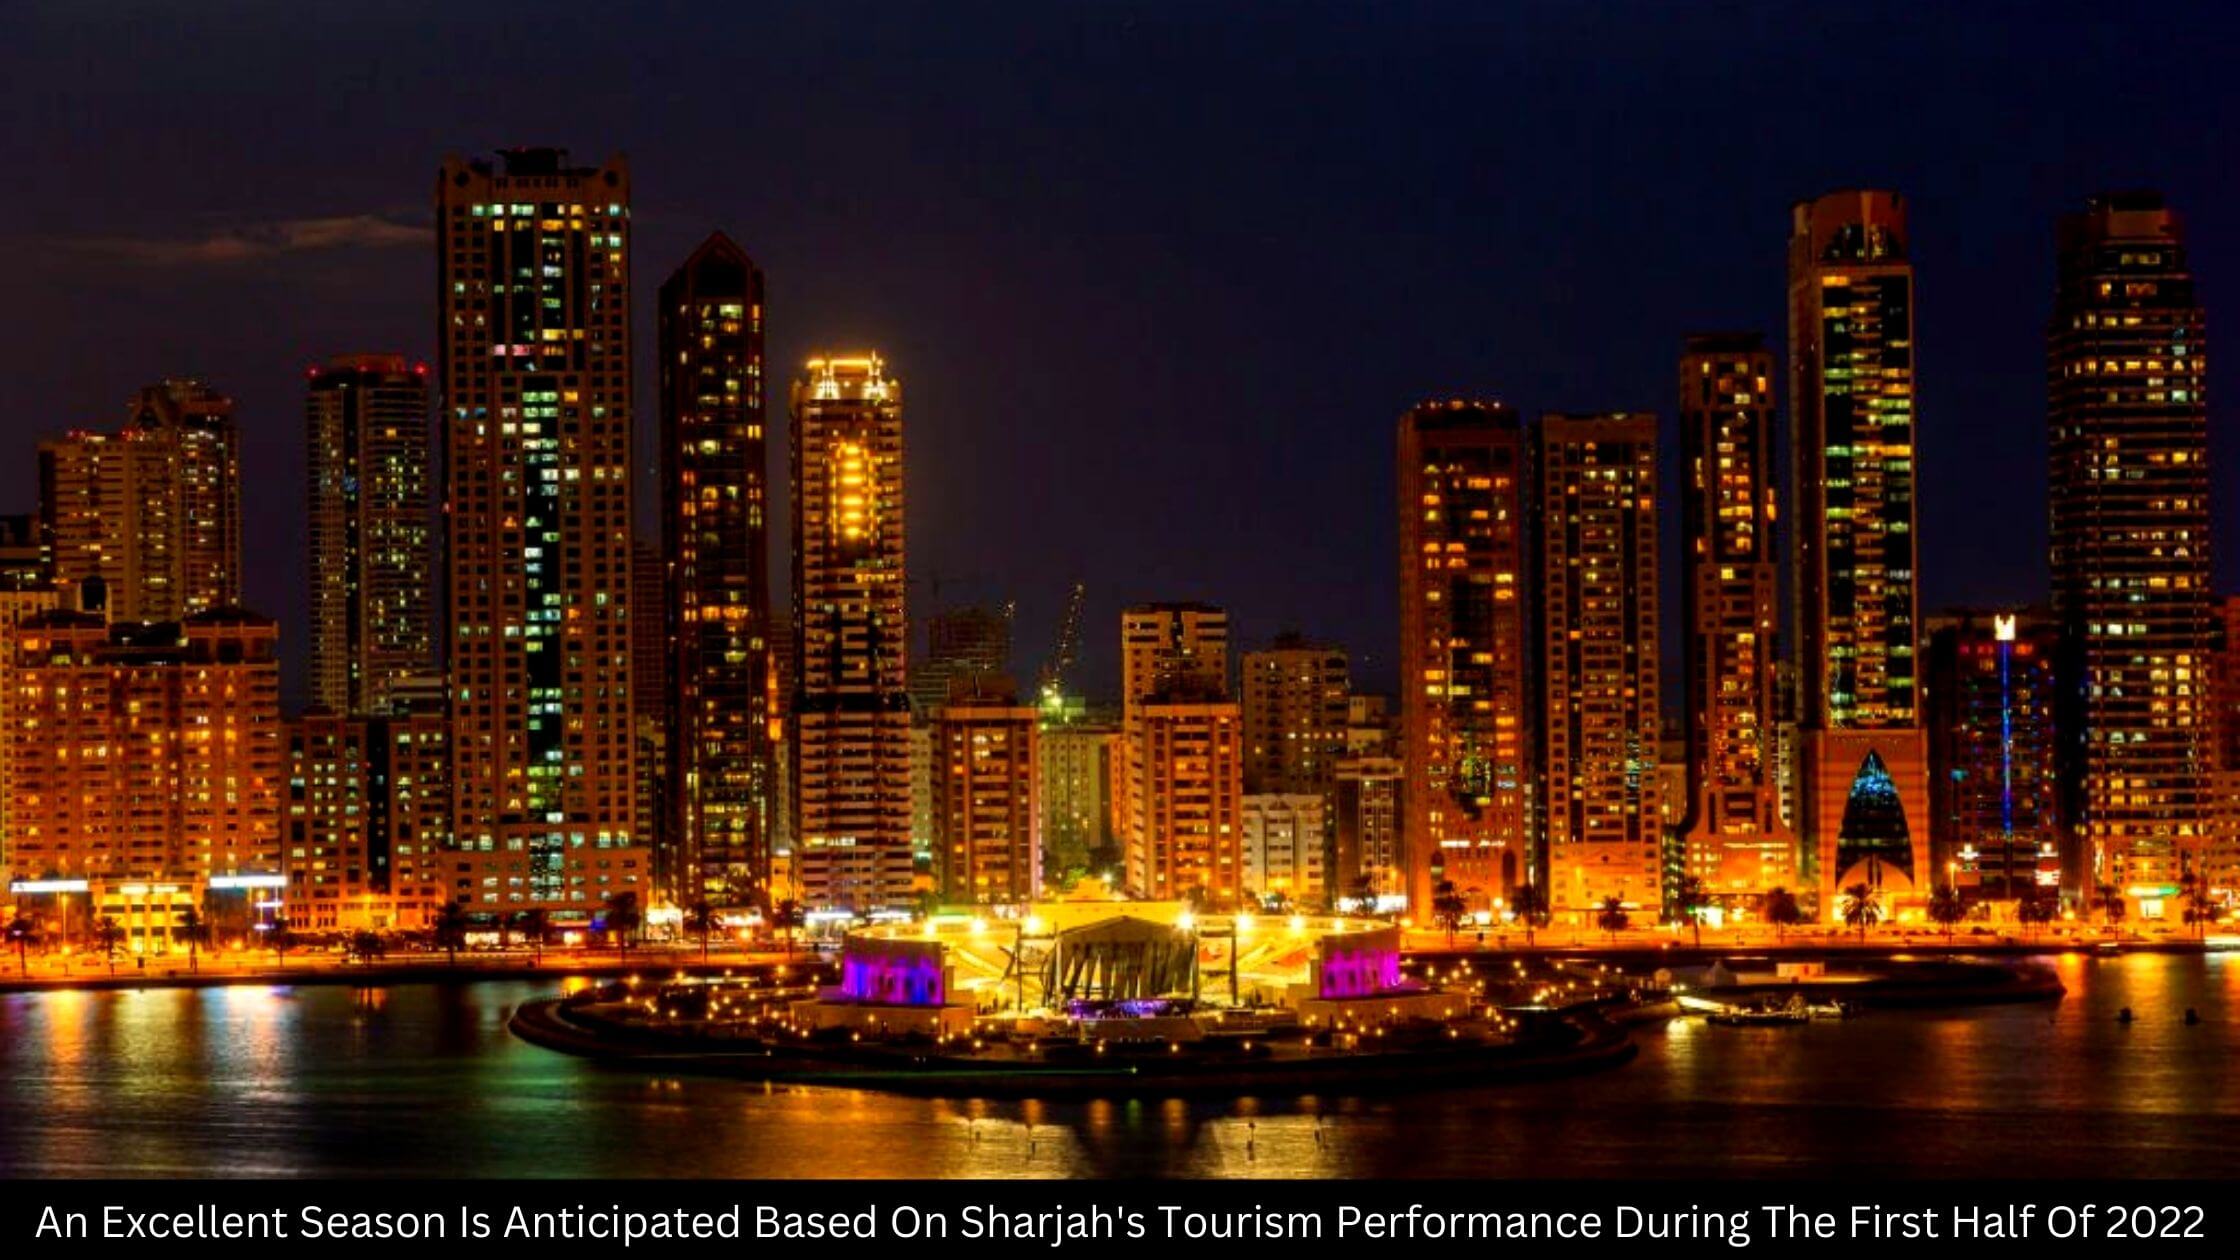 An Excellent Season Is Anticipated Based On Sharjah’s Tourism Performance During The First Half Of 2022